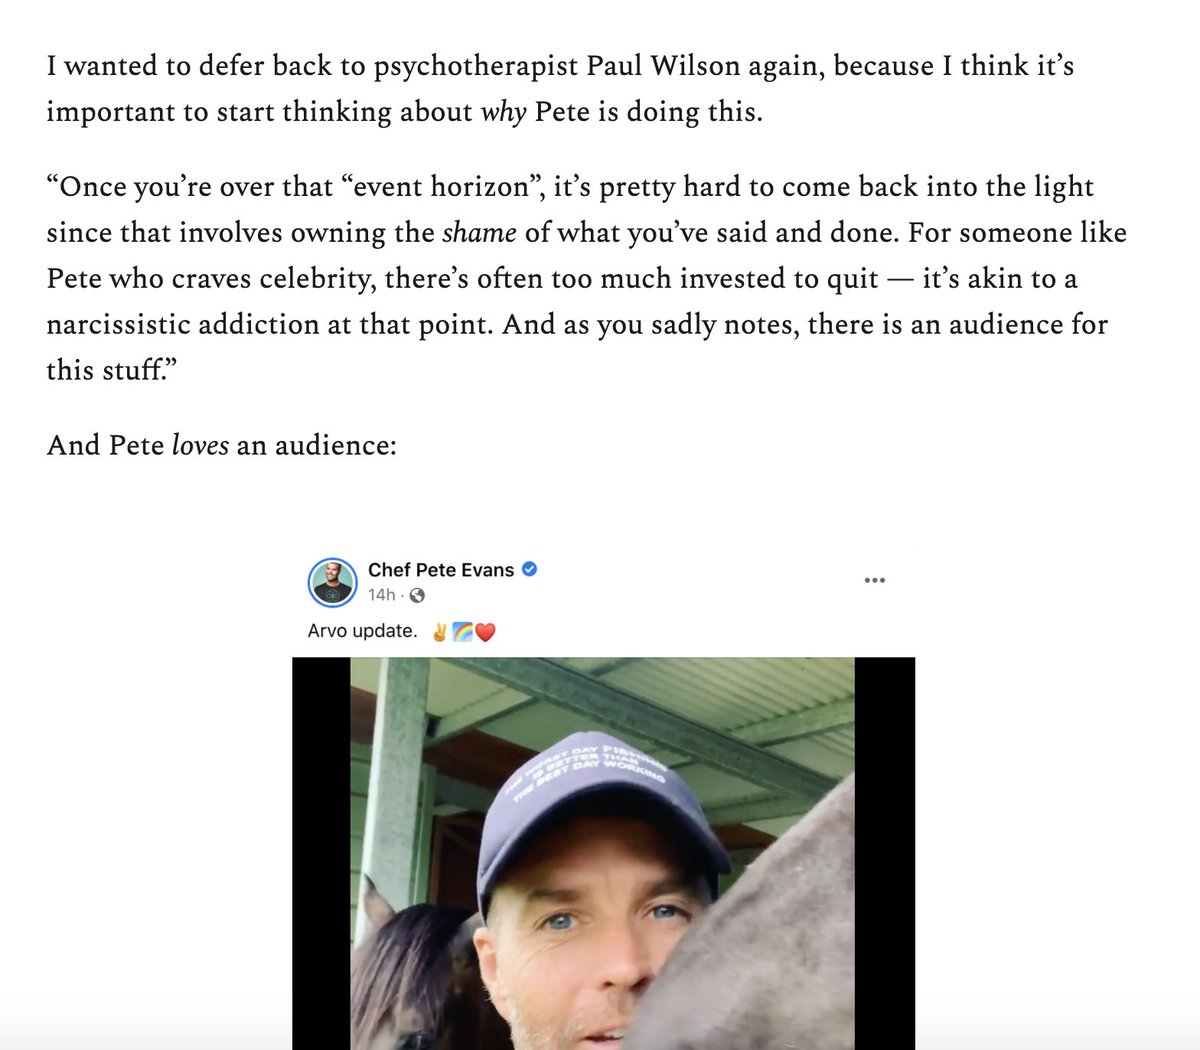 thread 2/4: shame also factors into what pete is doing - and the quest for likes and celebrity has this uncanny ability to overshadow this very intense emotion: